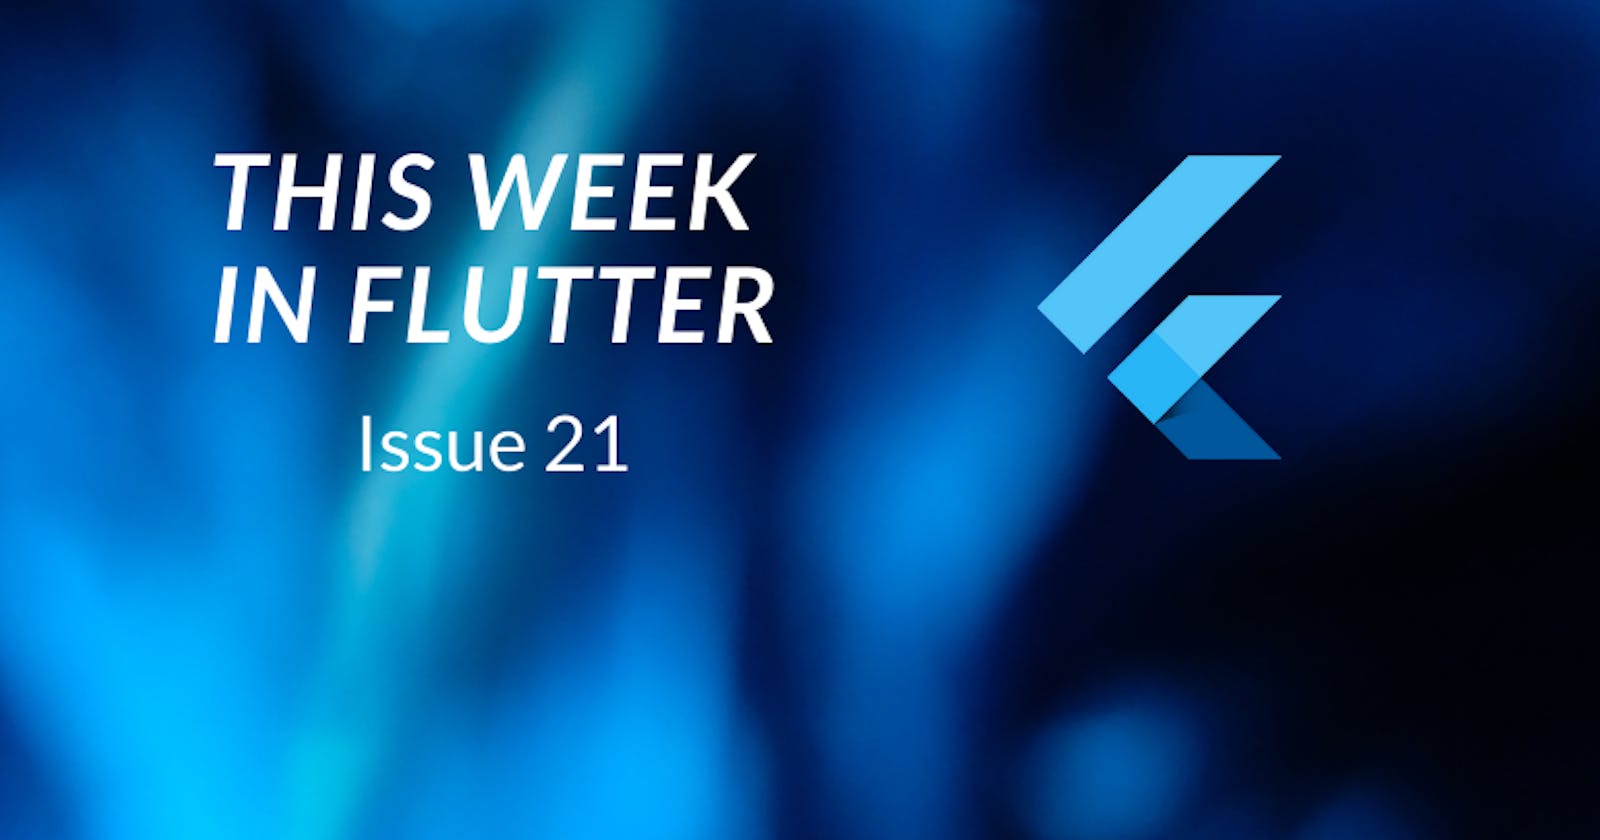 This week in Flutter #21